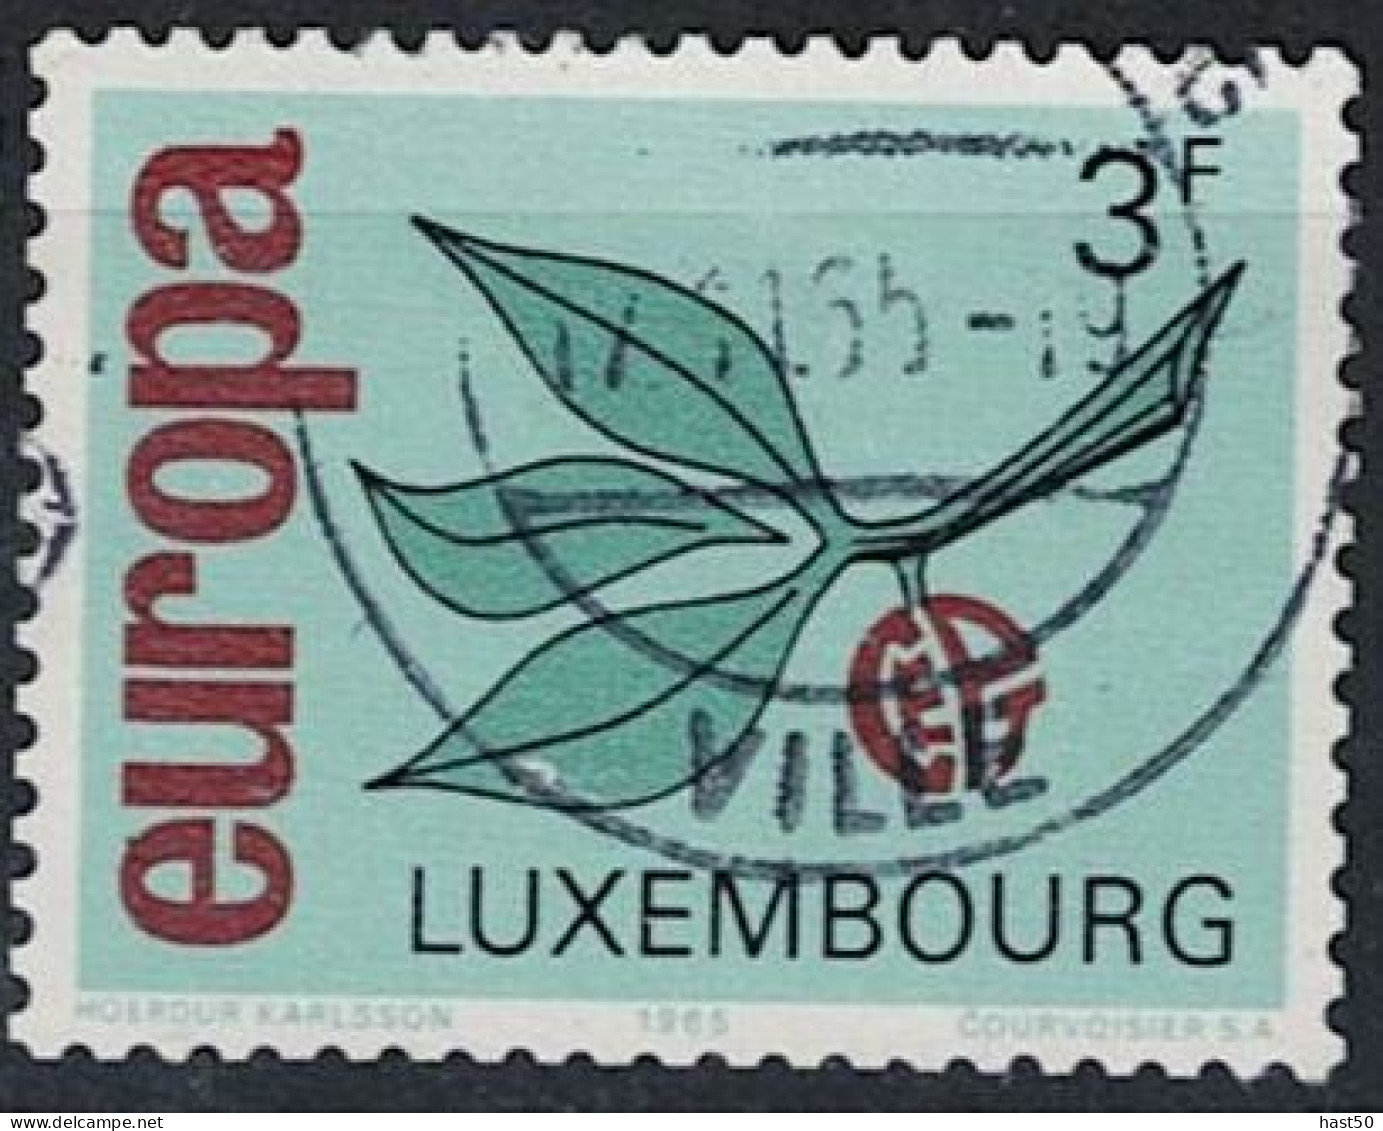 Luxemburg - Europs (MiNr: 715) 1965 - Gest Used Obl - Usados